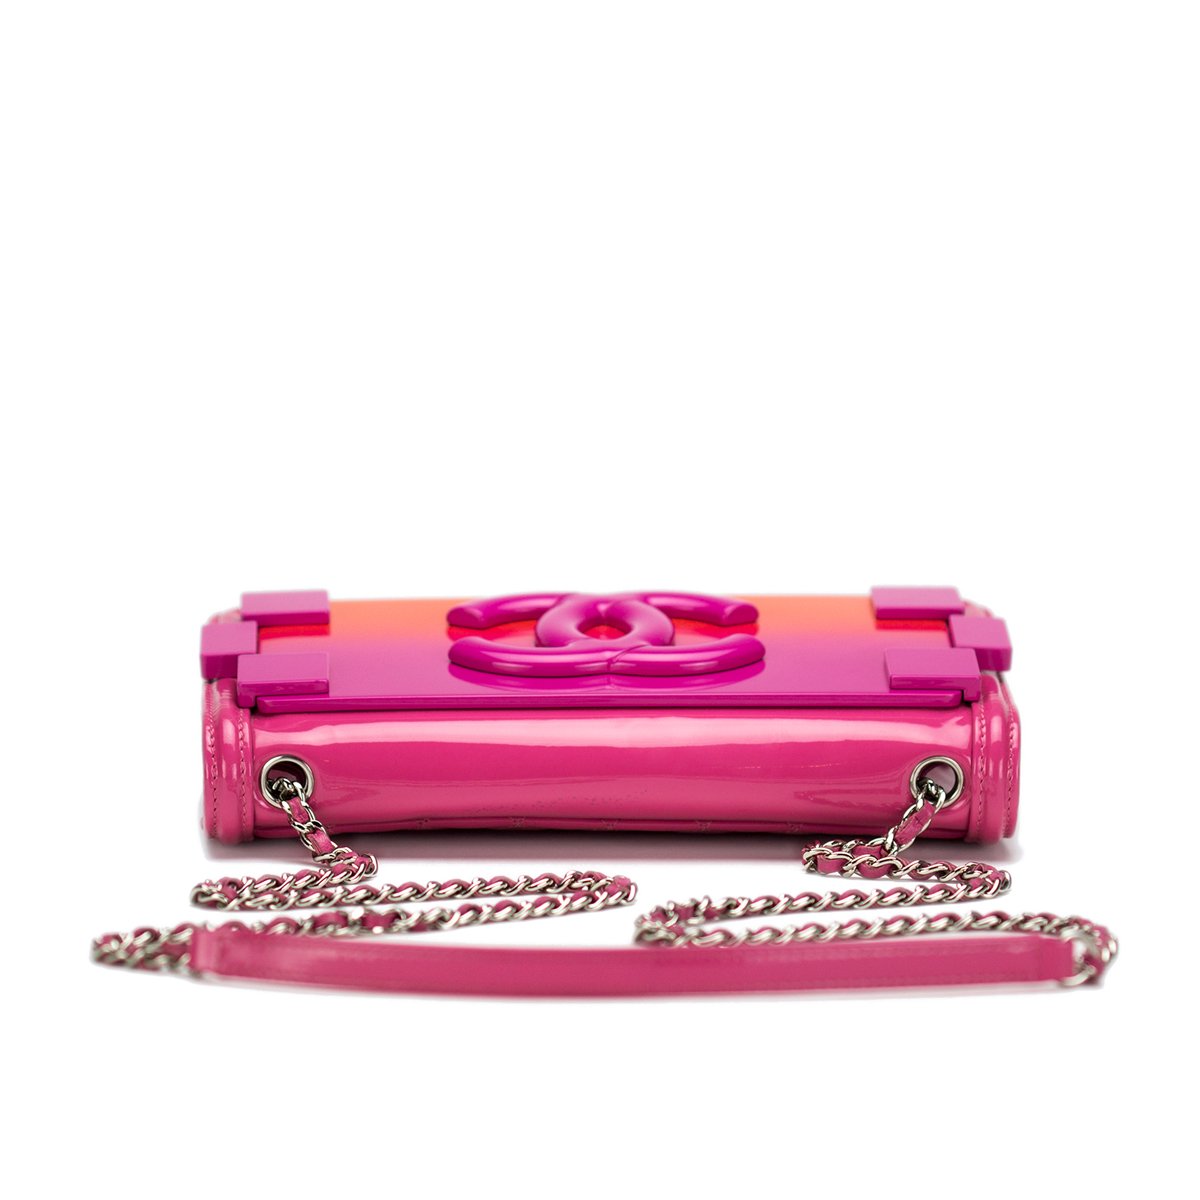 Chanel Lego Hot Pink Patent Brick Ombre Patent Flap